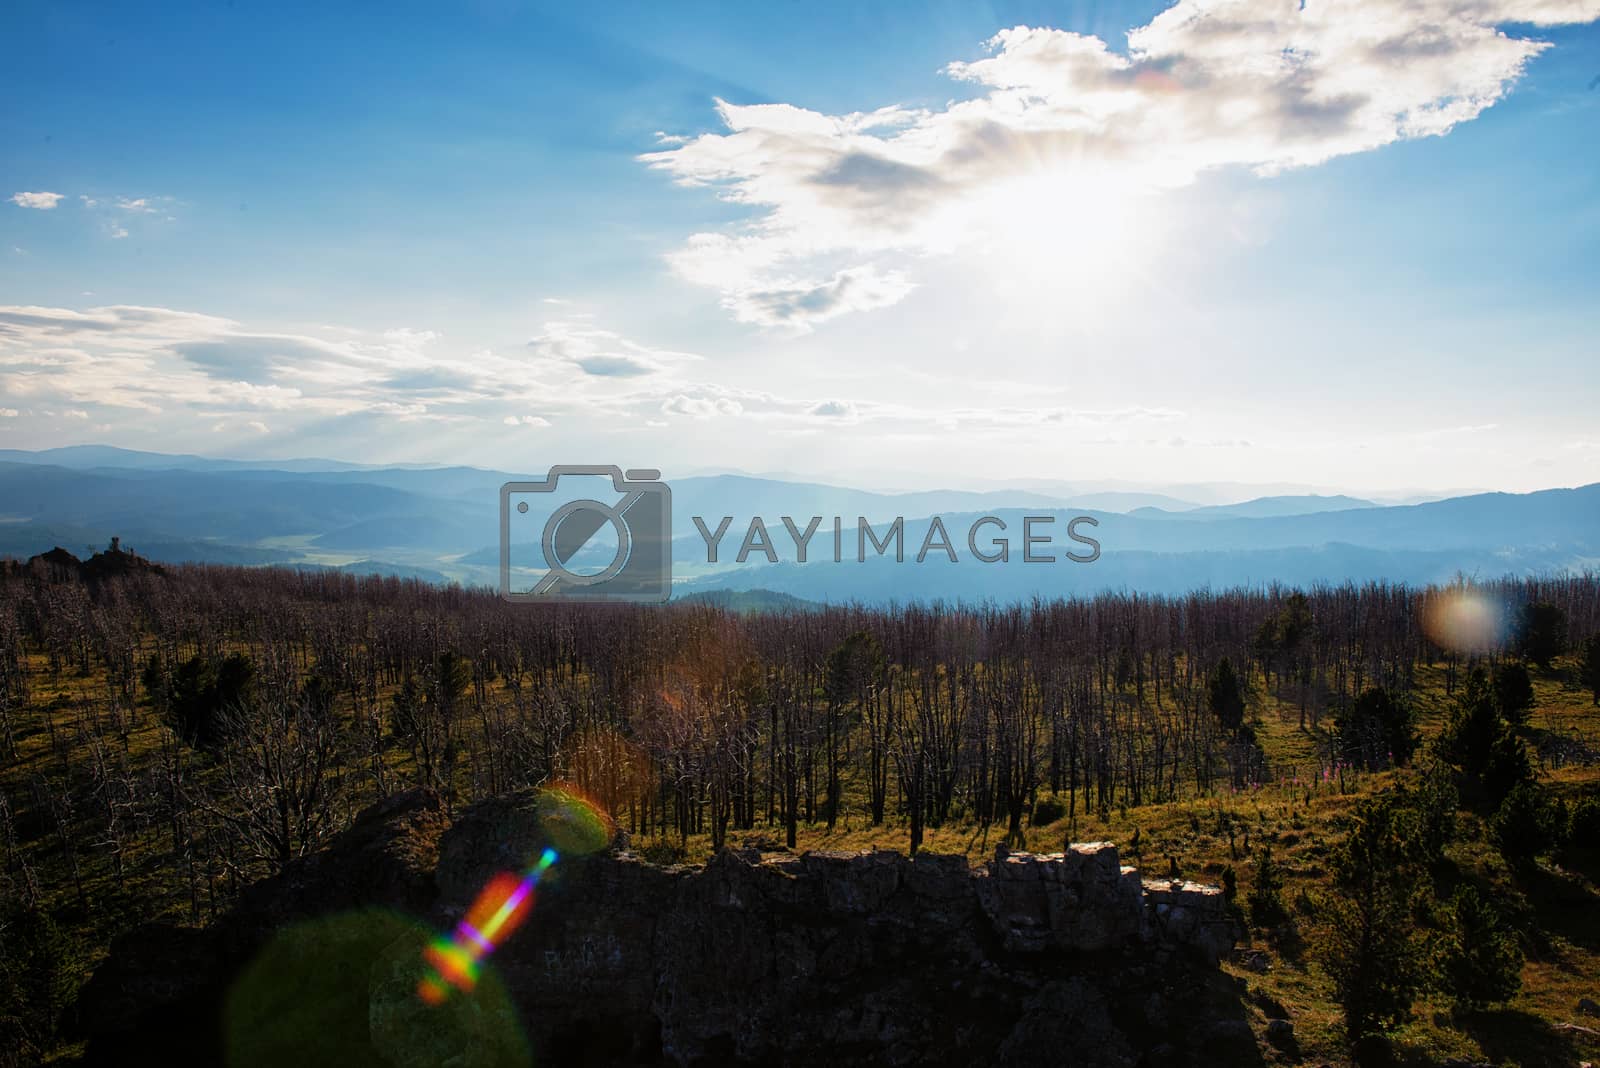 Landscape with dead forest on the mountain pass, height over 2000 meters, in the mountains in Altay